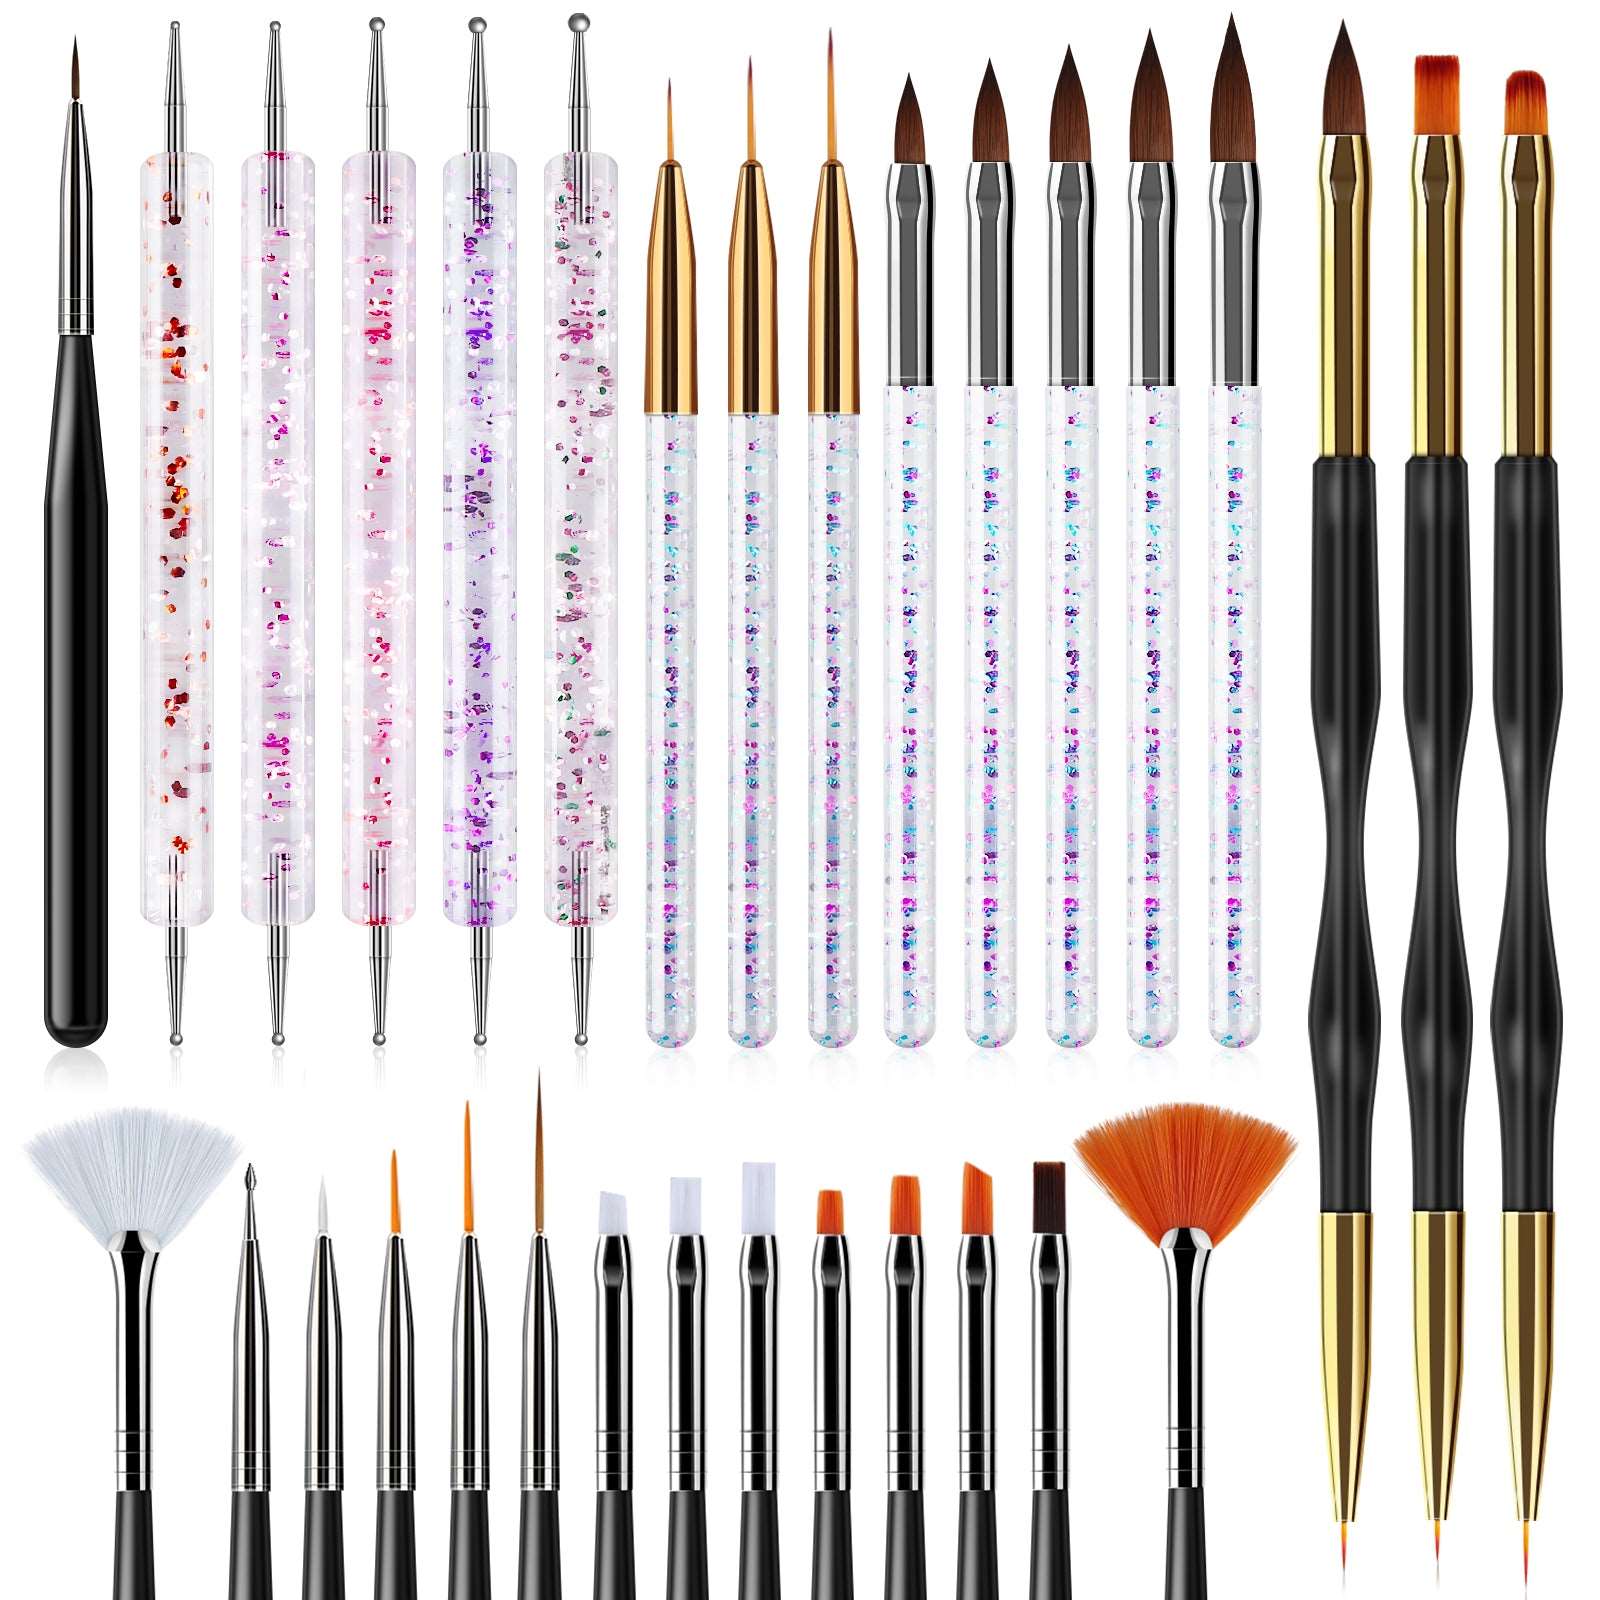 Buy KADS 5pcs Nail Brush Set 2#/4#/6#/8#/10# Acrylic Clean-up Brush Nail  Art Brush Design Nail Art Painting Brush Online at Low Prices in India -  Amazon.in